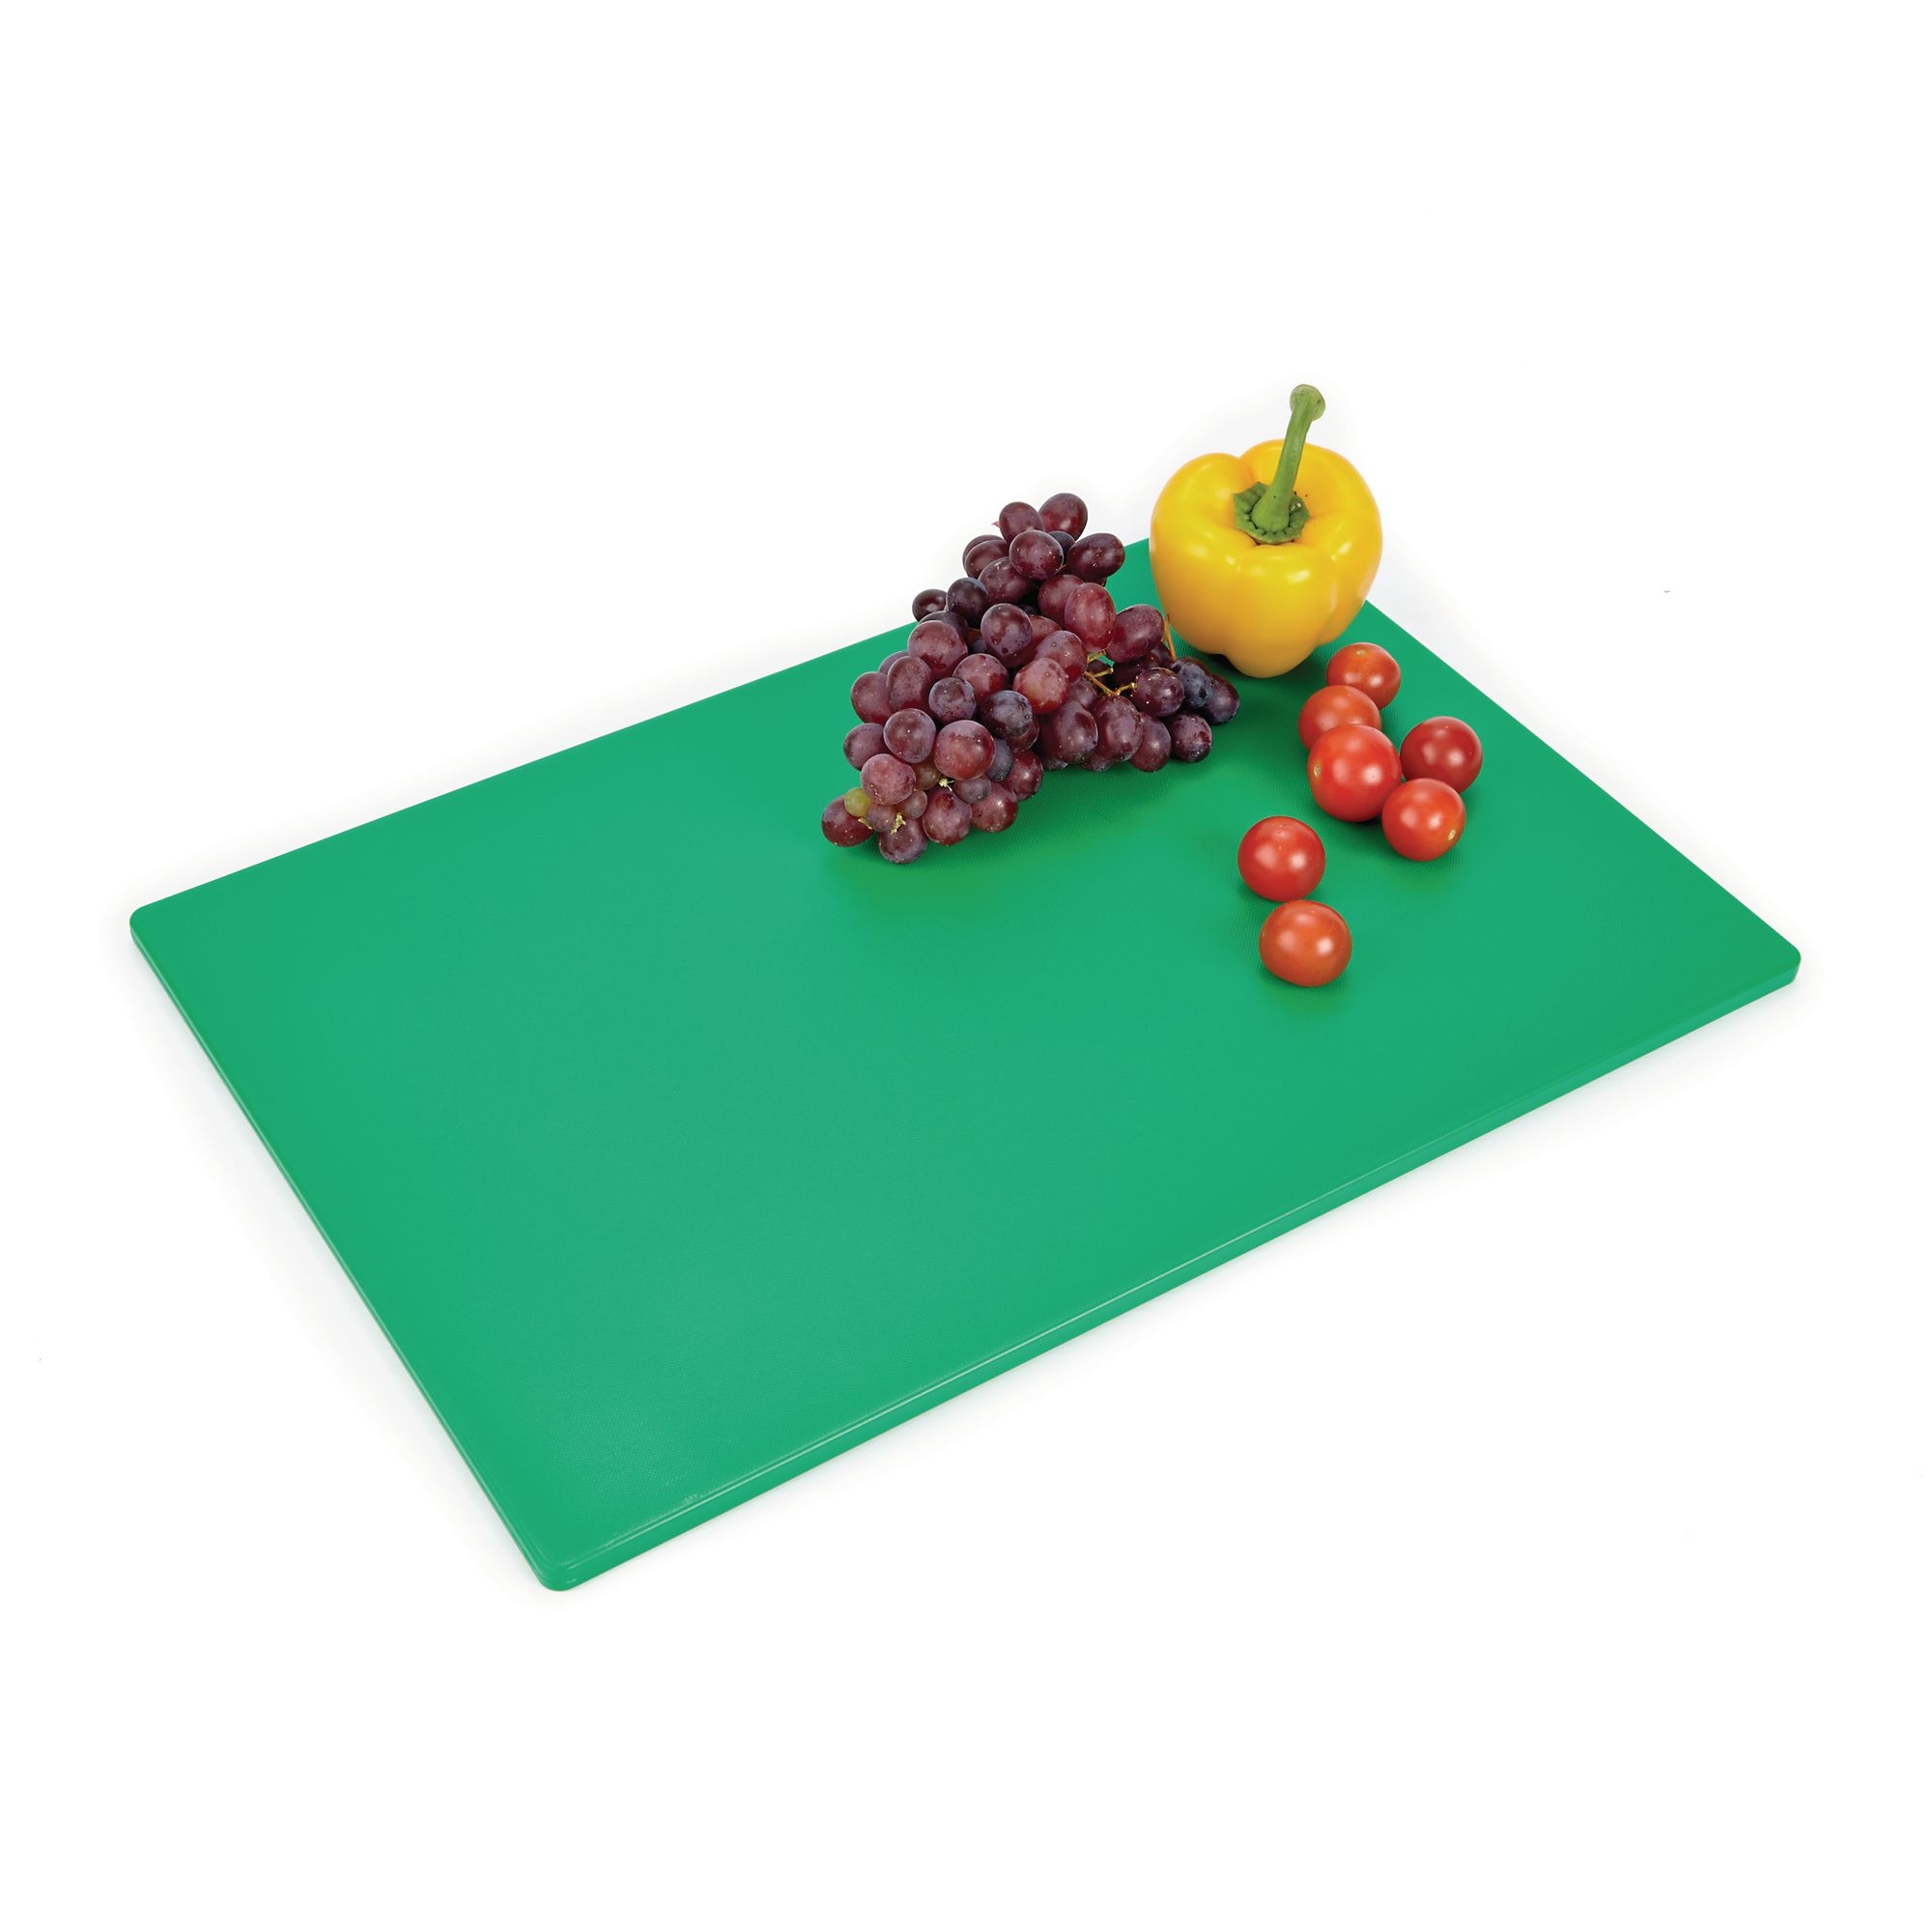 Colour Coded Cutting Boards - Brown